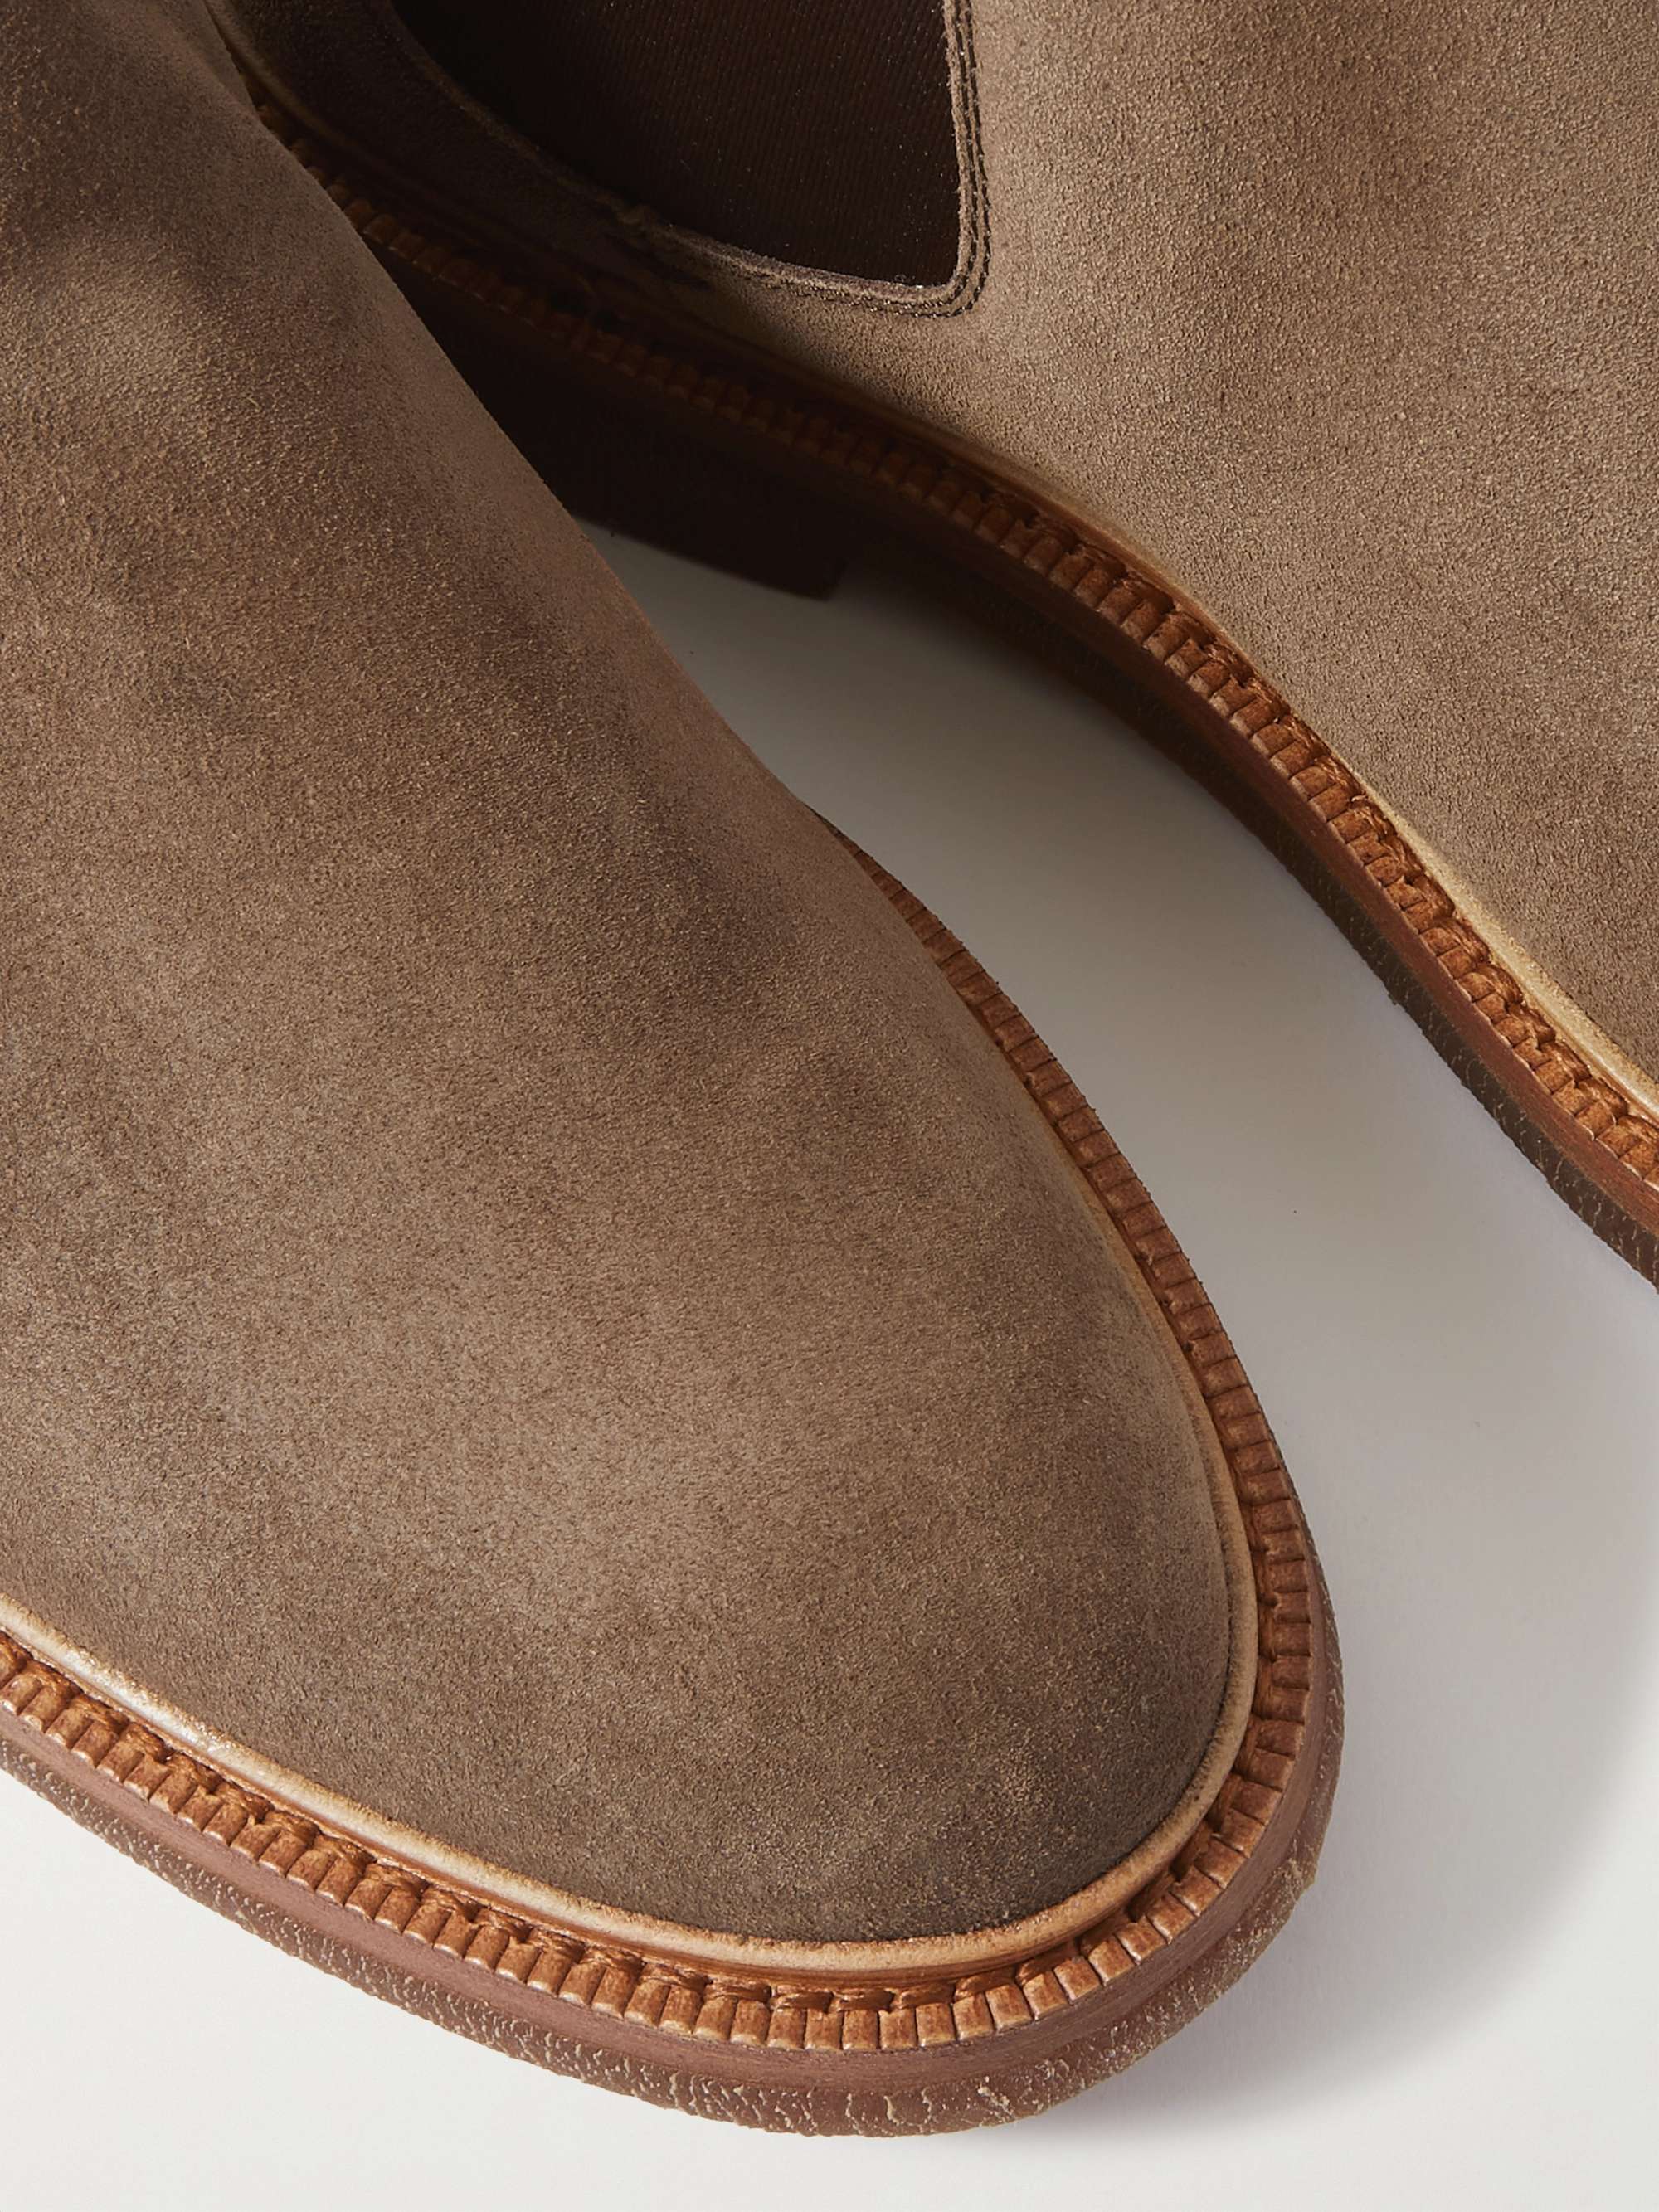 BRUNELLO CUCINELLI Waxed-Suede Chelsea Boots